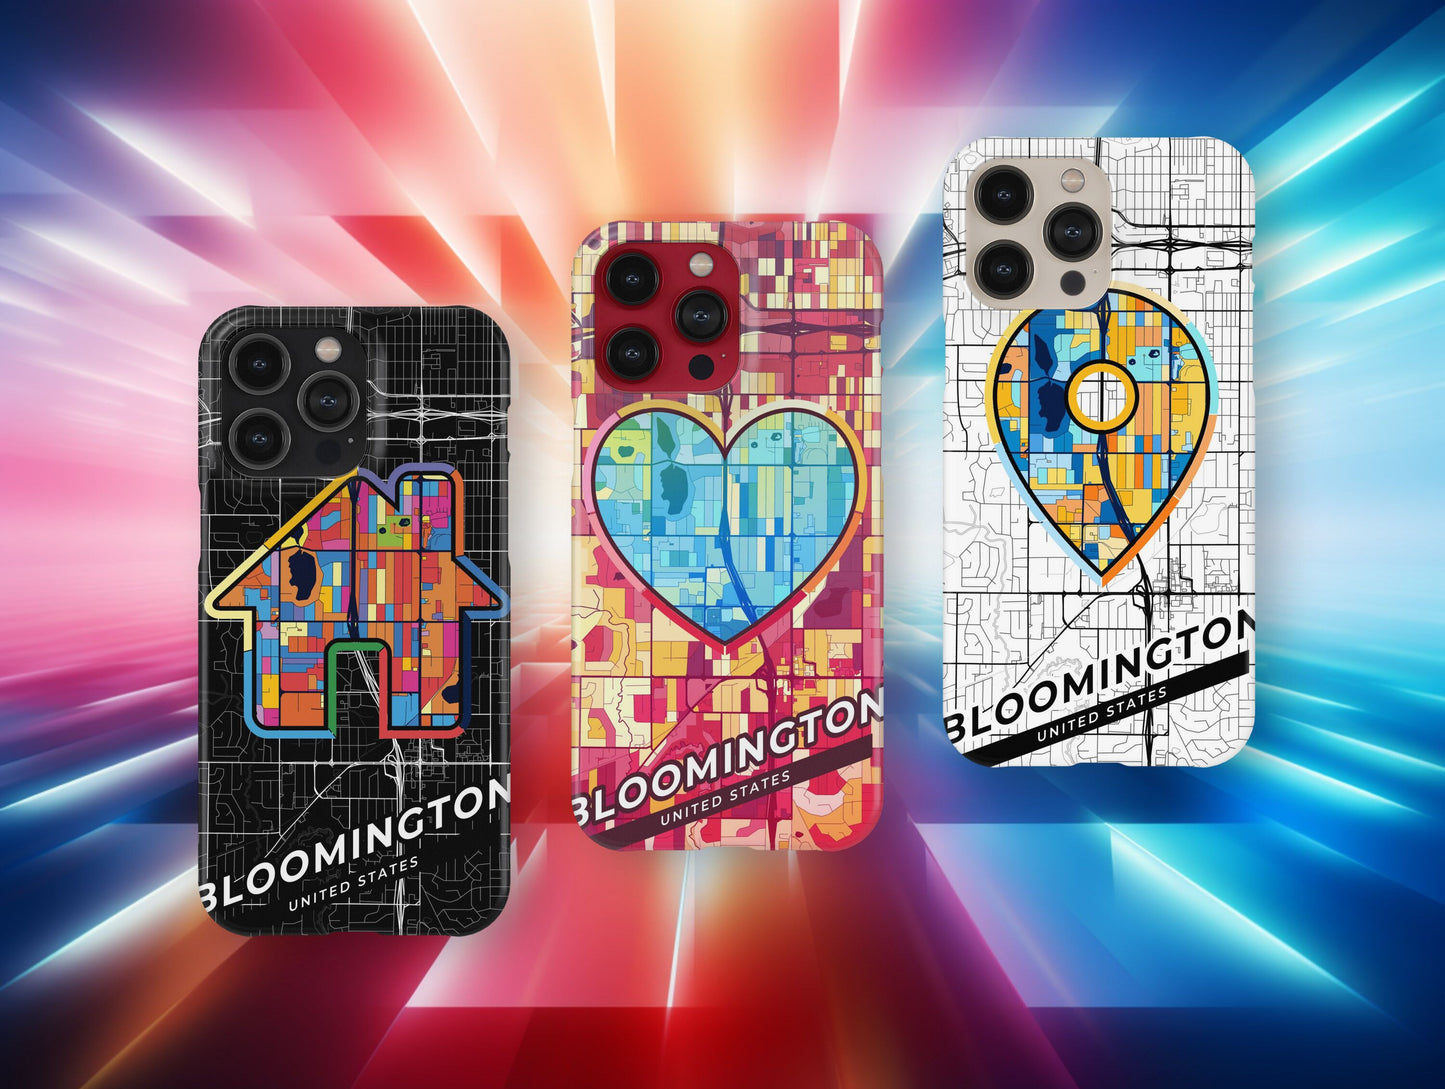 Bloomington Minnesota slim phone case with colorful icon. Birthday, wedding or housewarming gift. Couple match cases.